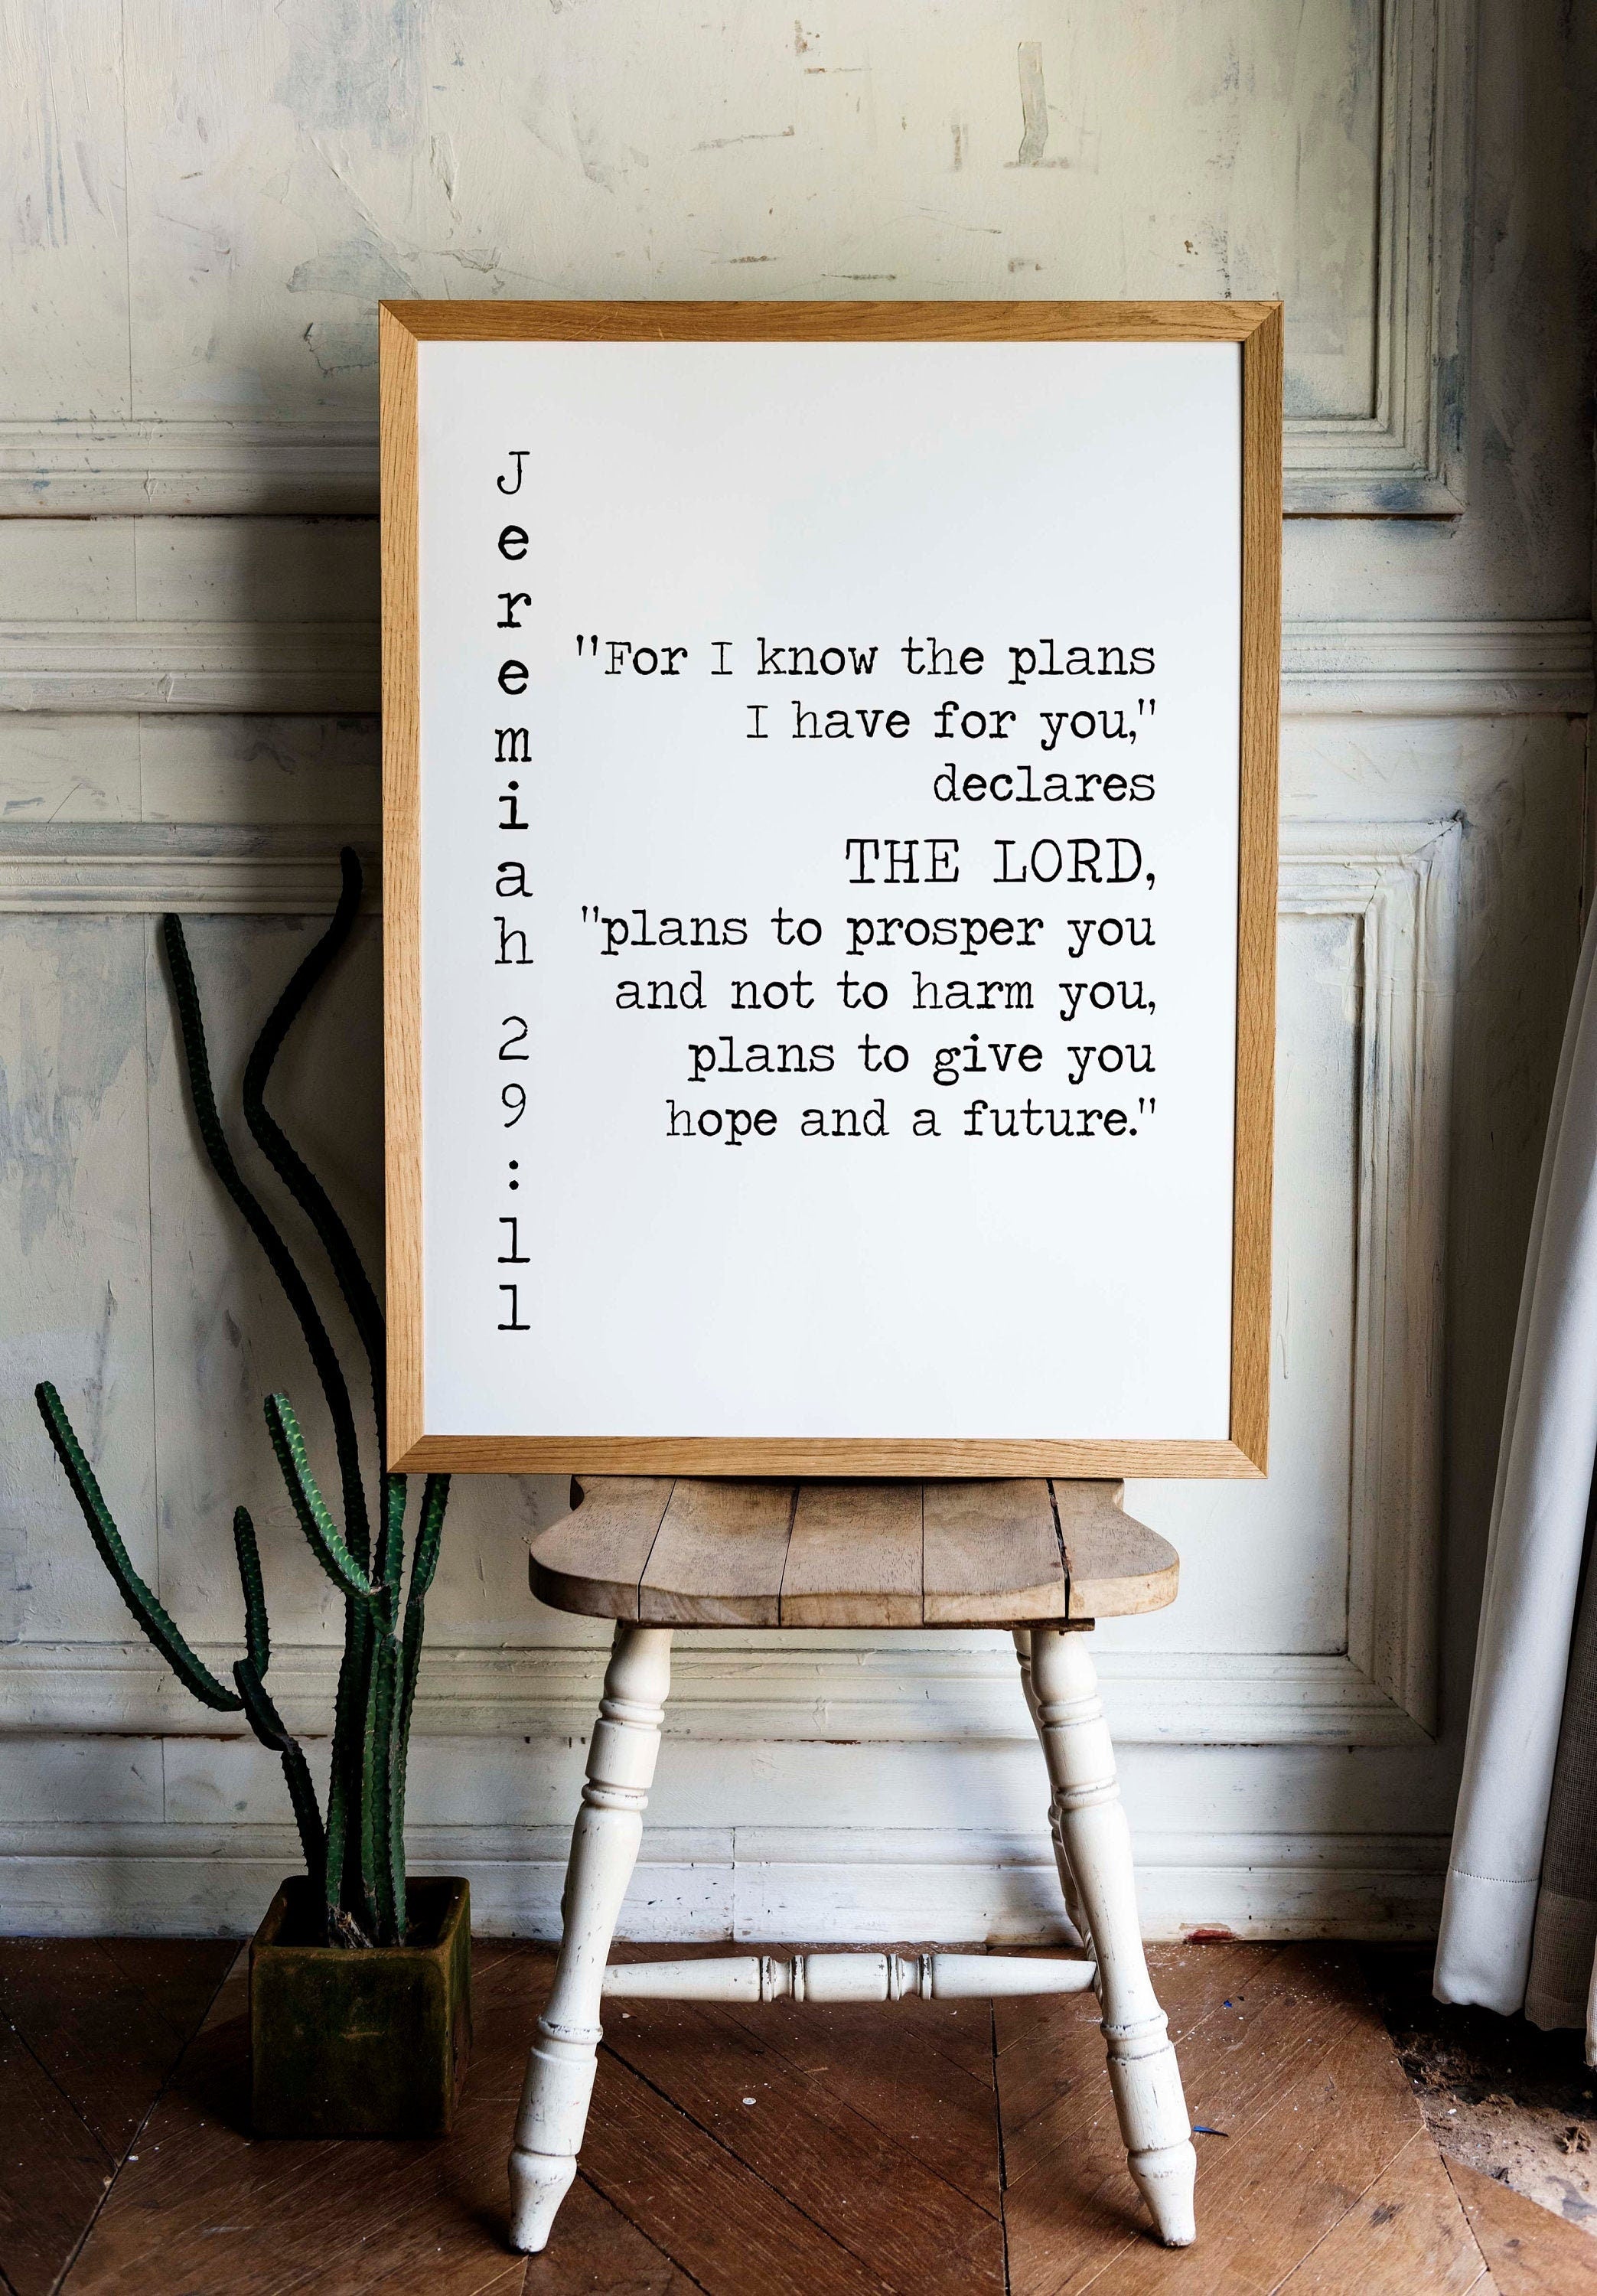 Jeremiah 29:11 Bible Verse Print, Give you Hope and a Future Inspirational Gift Wall Art in Black & White